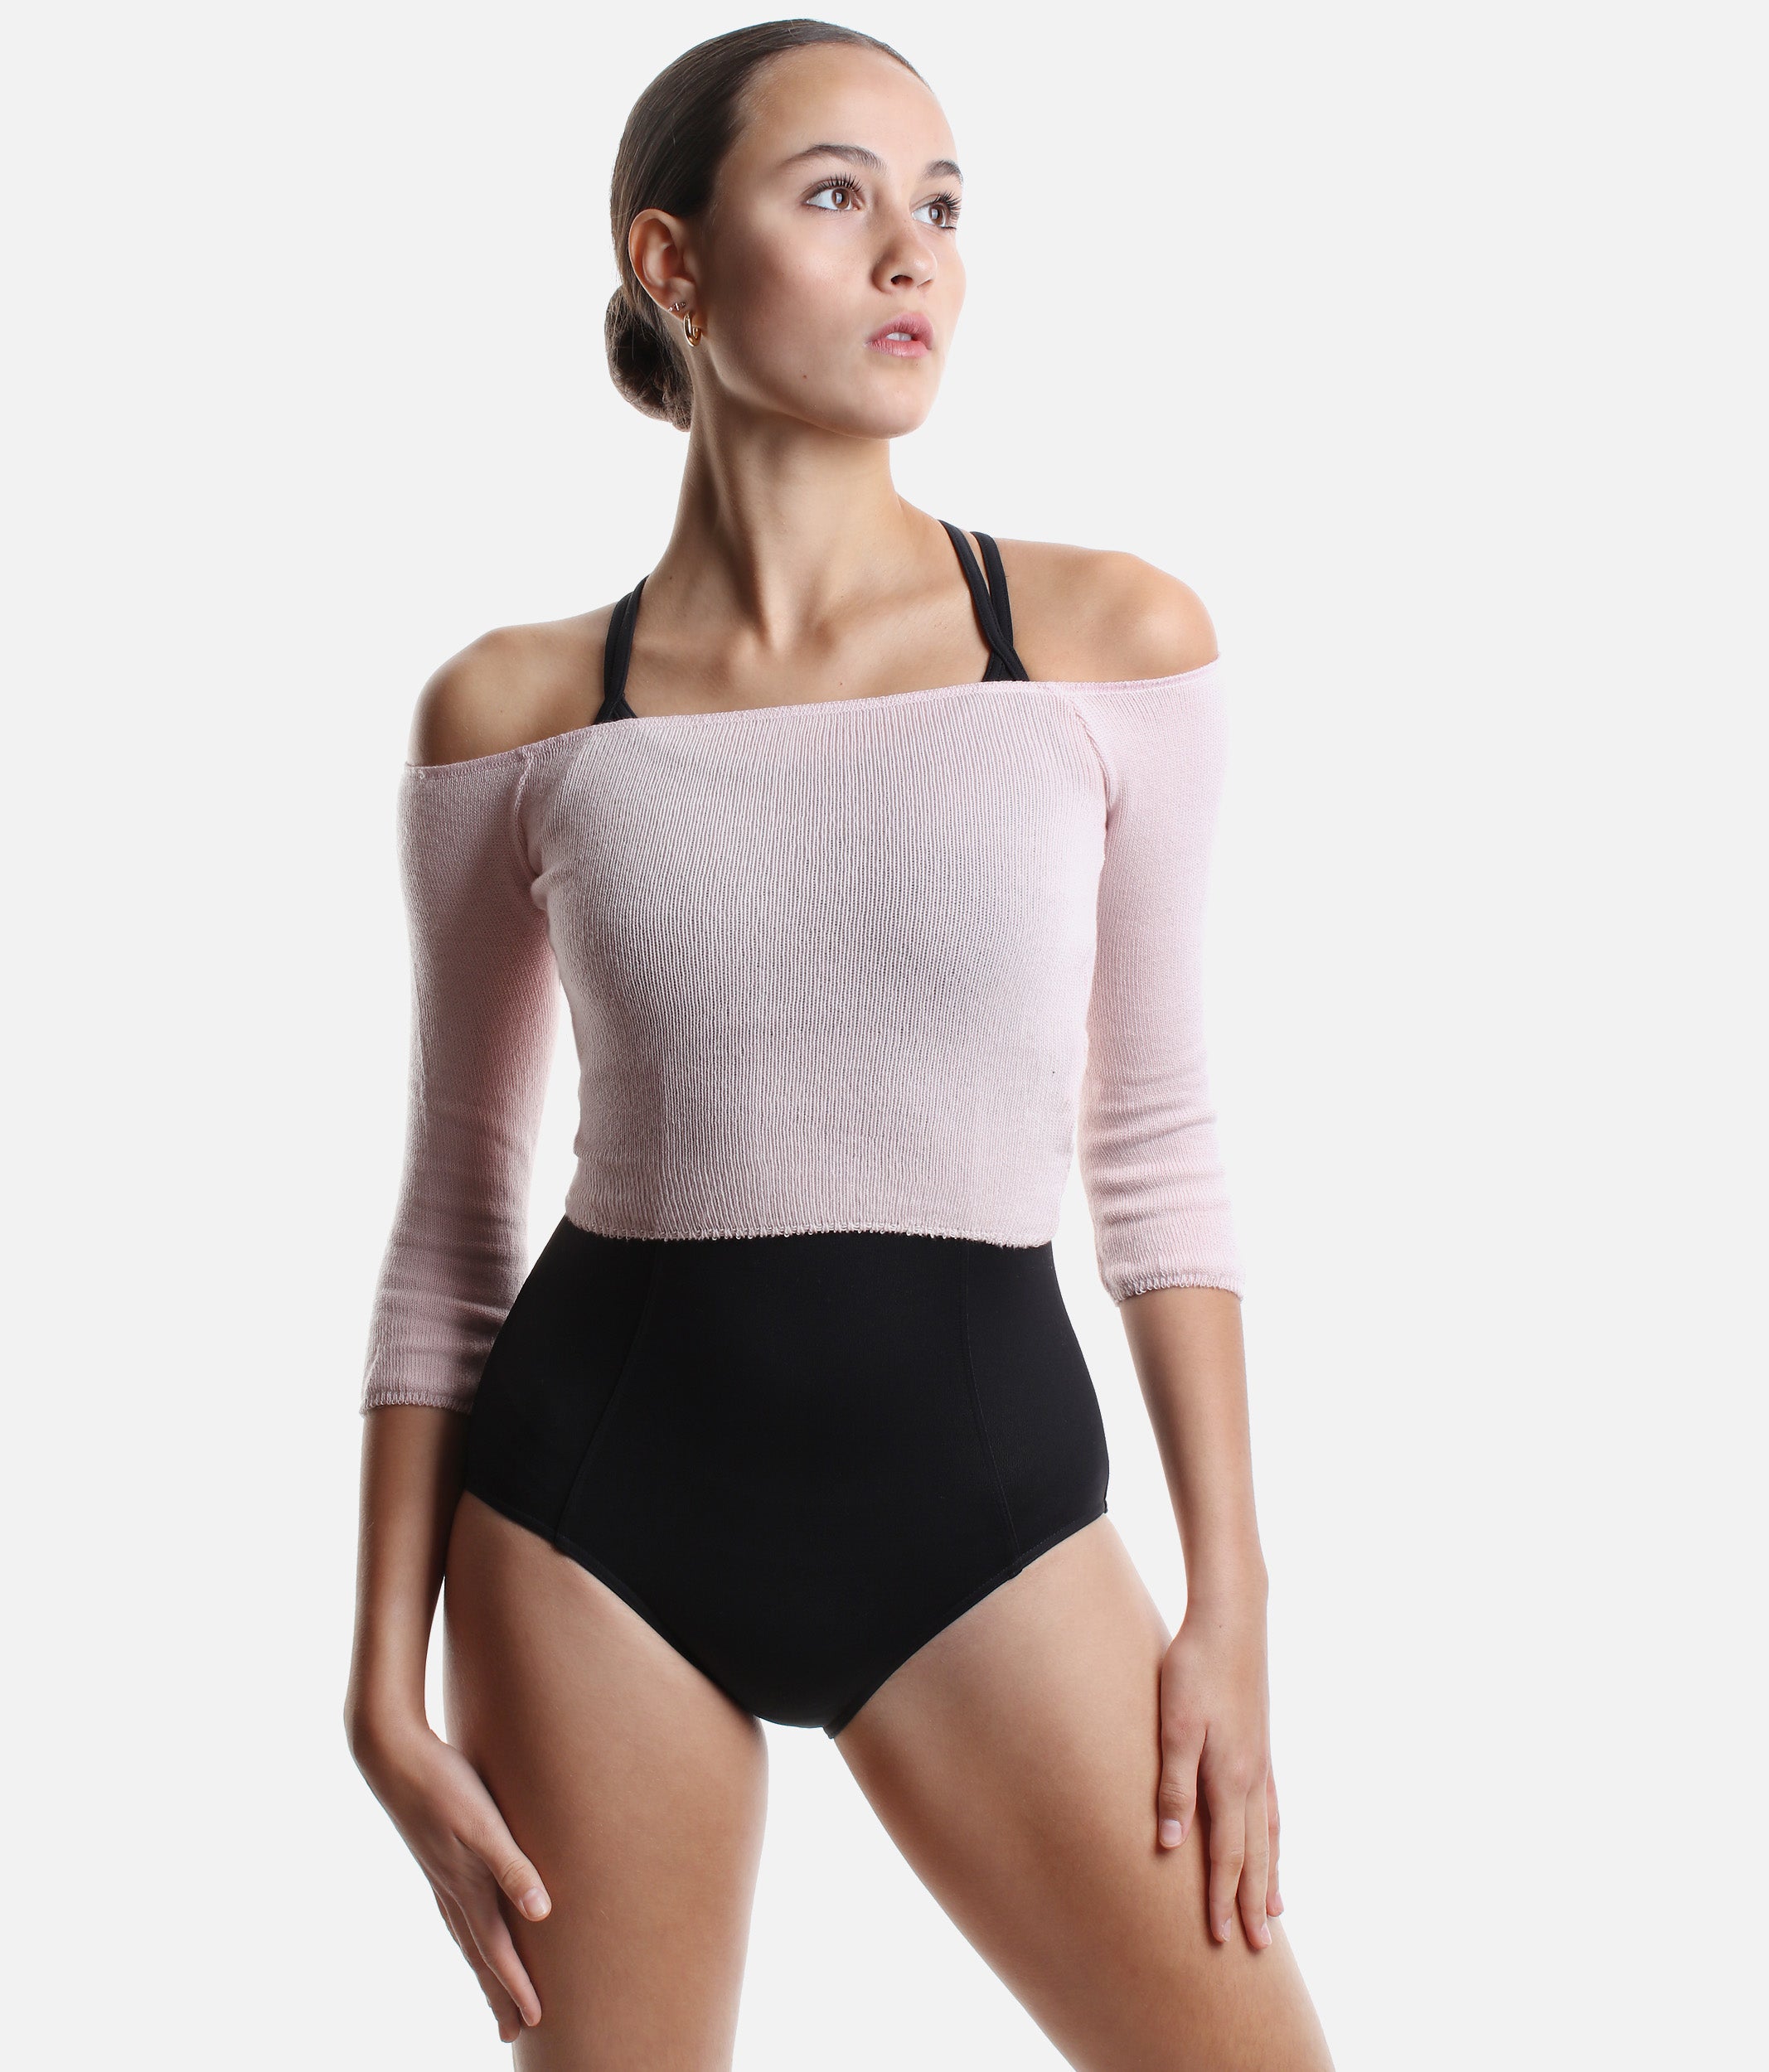 Knitted Crop Top, Dance Warmup - 6579